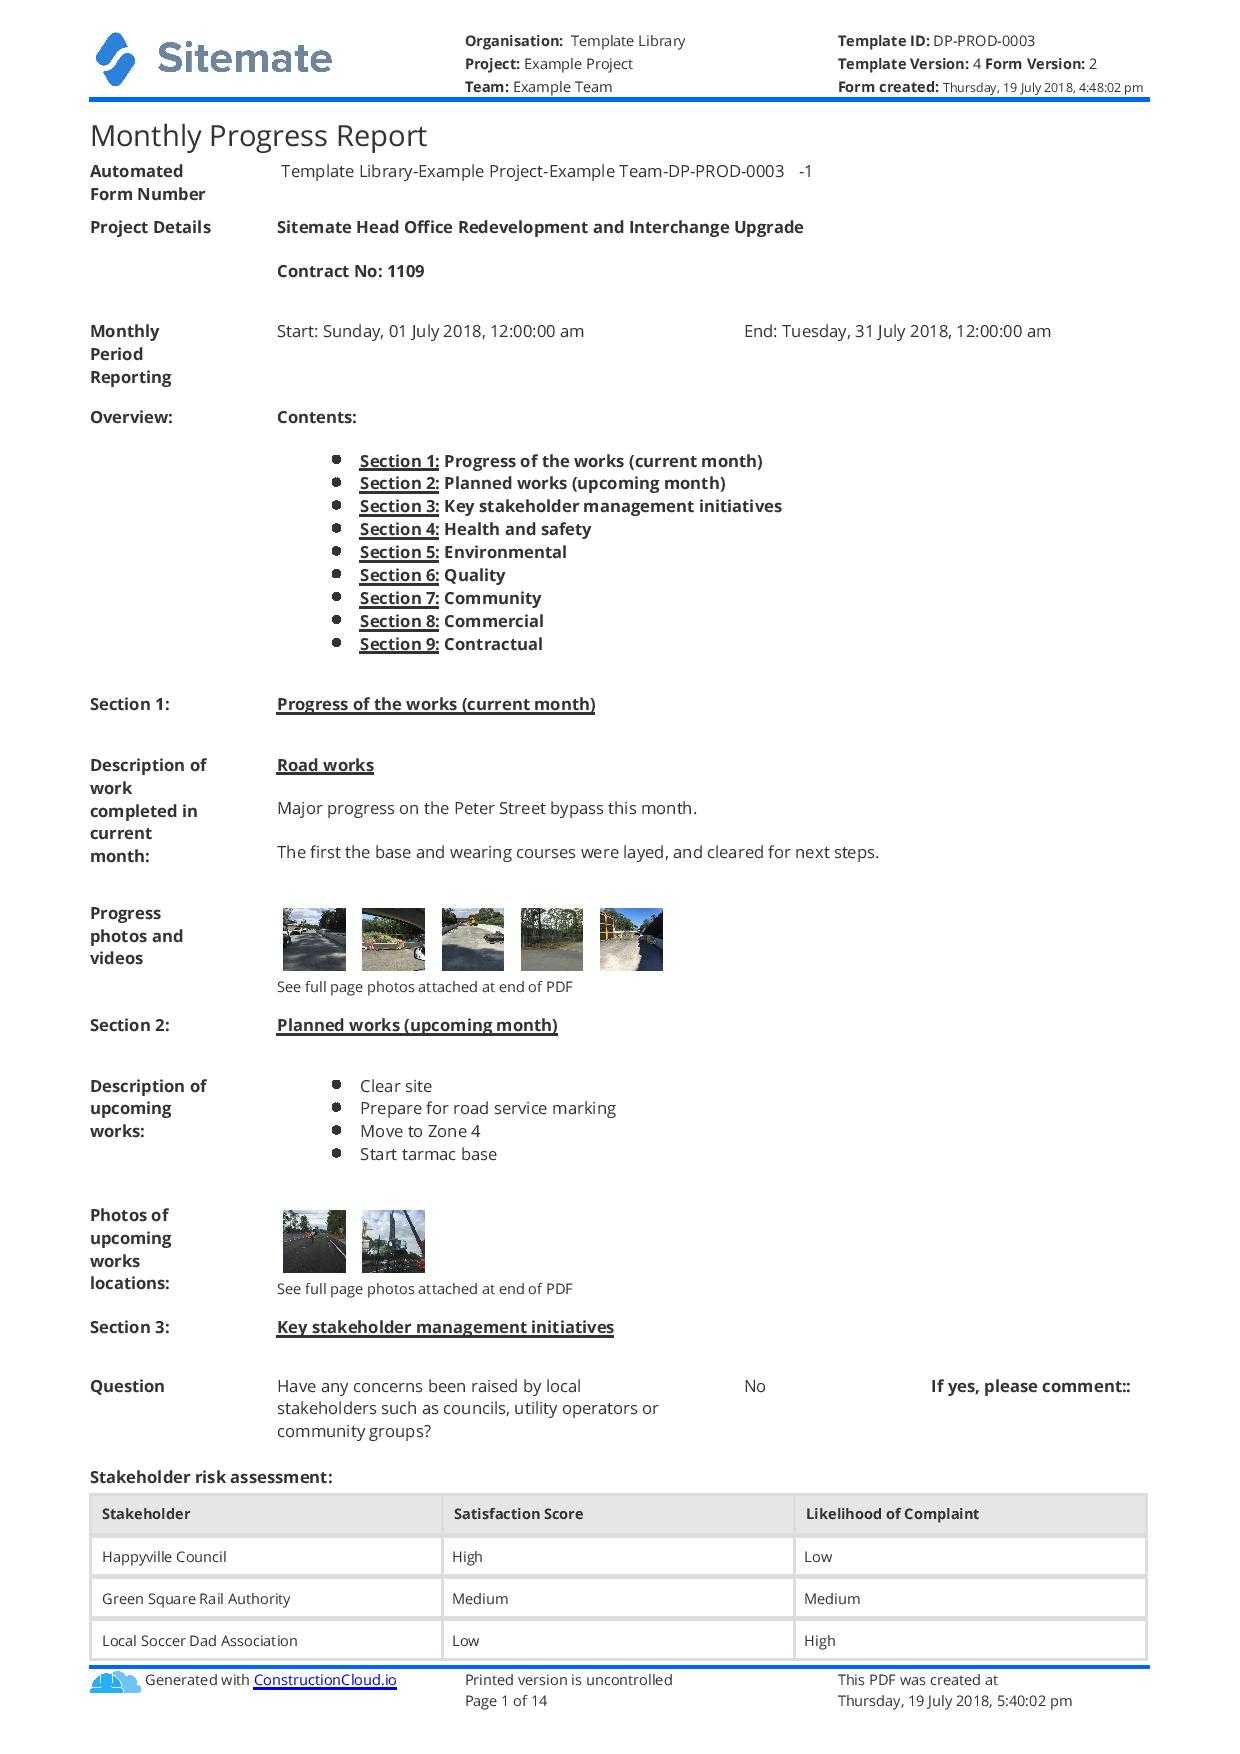 Monthly Construction Progress Report Template: Use This With Construction Daily Progress Report Template